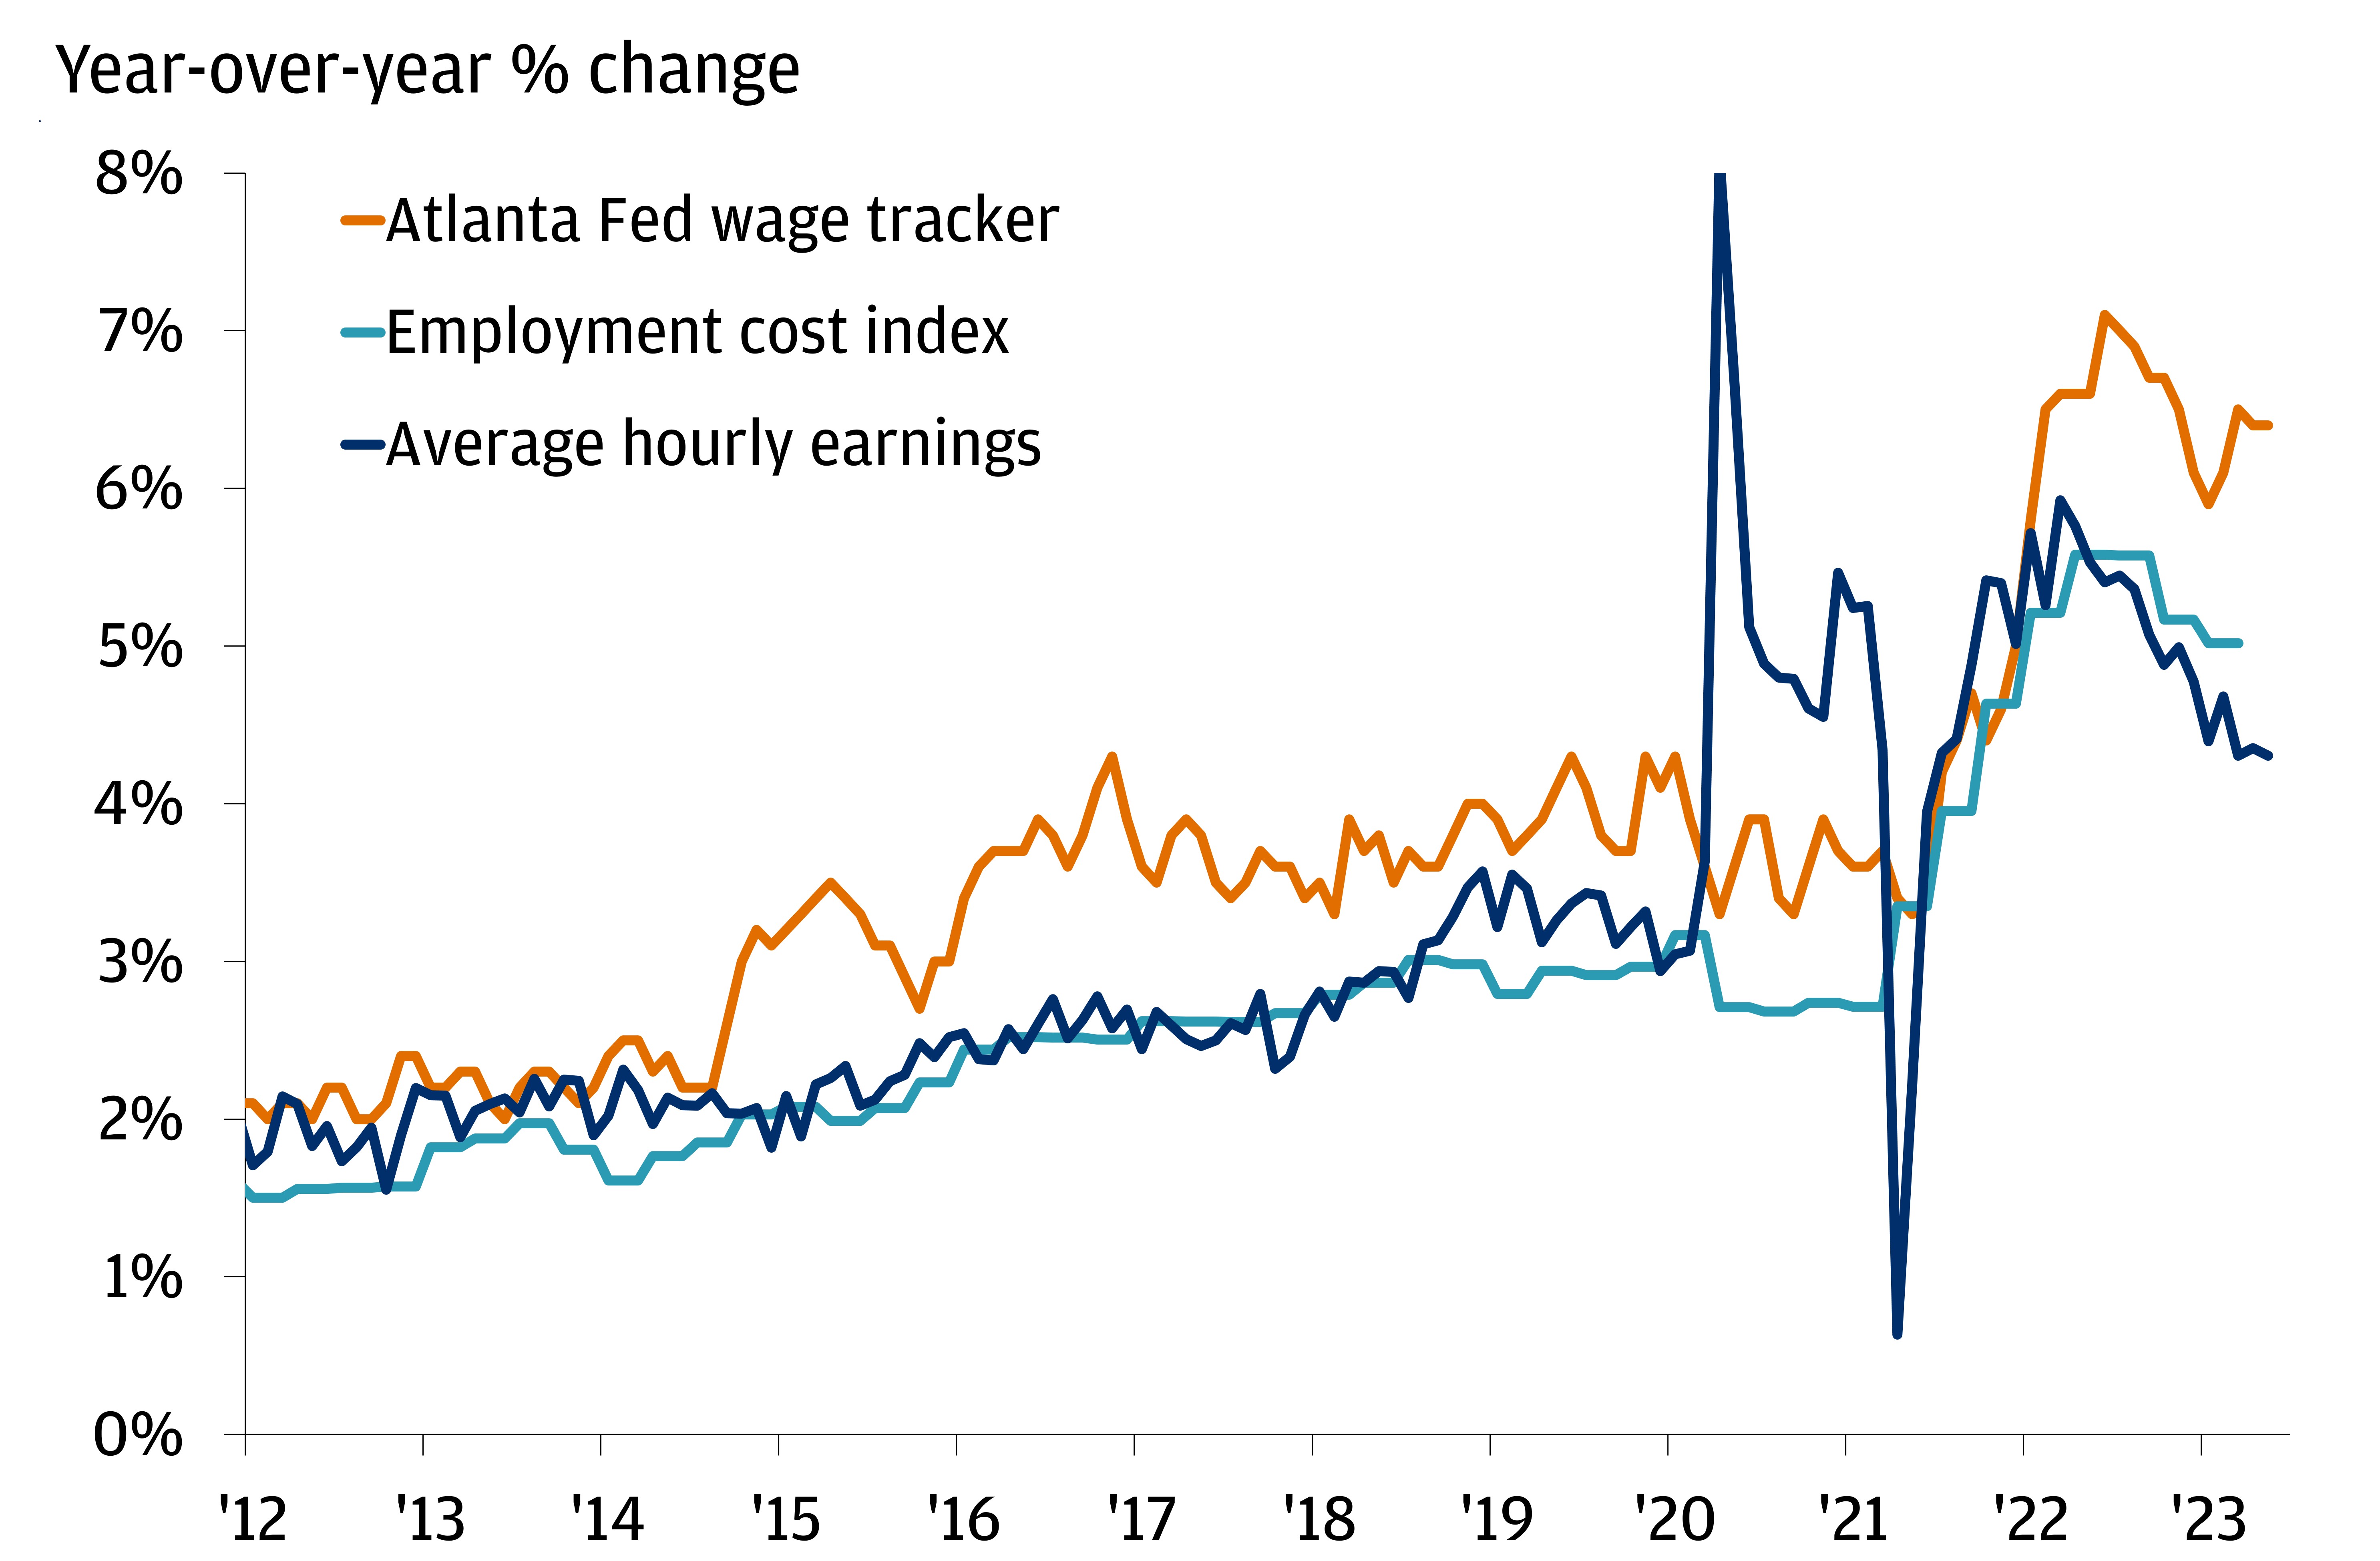 The chart describes the year-over-year % change of different wage growth measures: Atlanta Fed wage tracker, employment cost index, average hourly earnings.  For the Atlanta Fed wage tracker line, it started at 2.1% in December 2011.